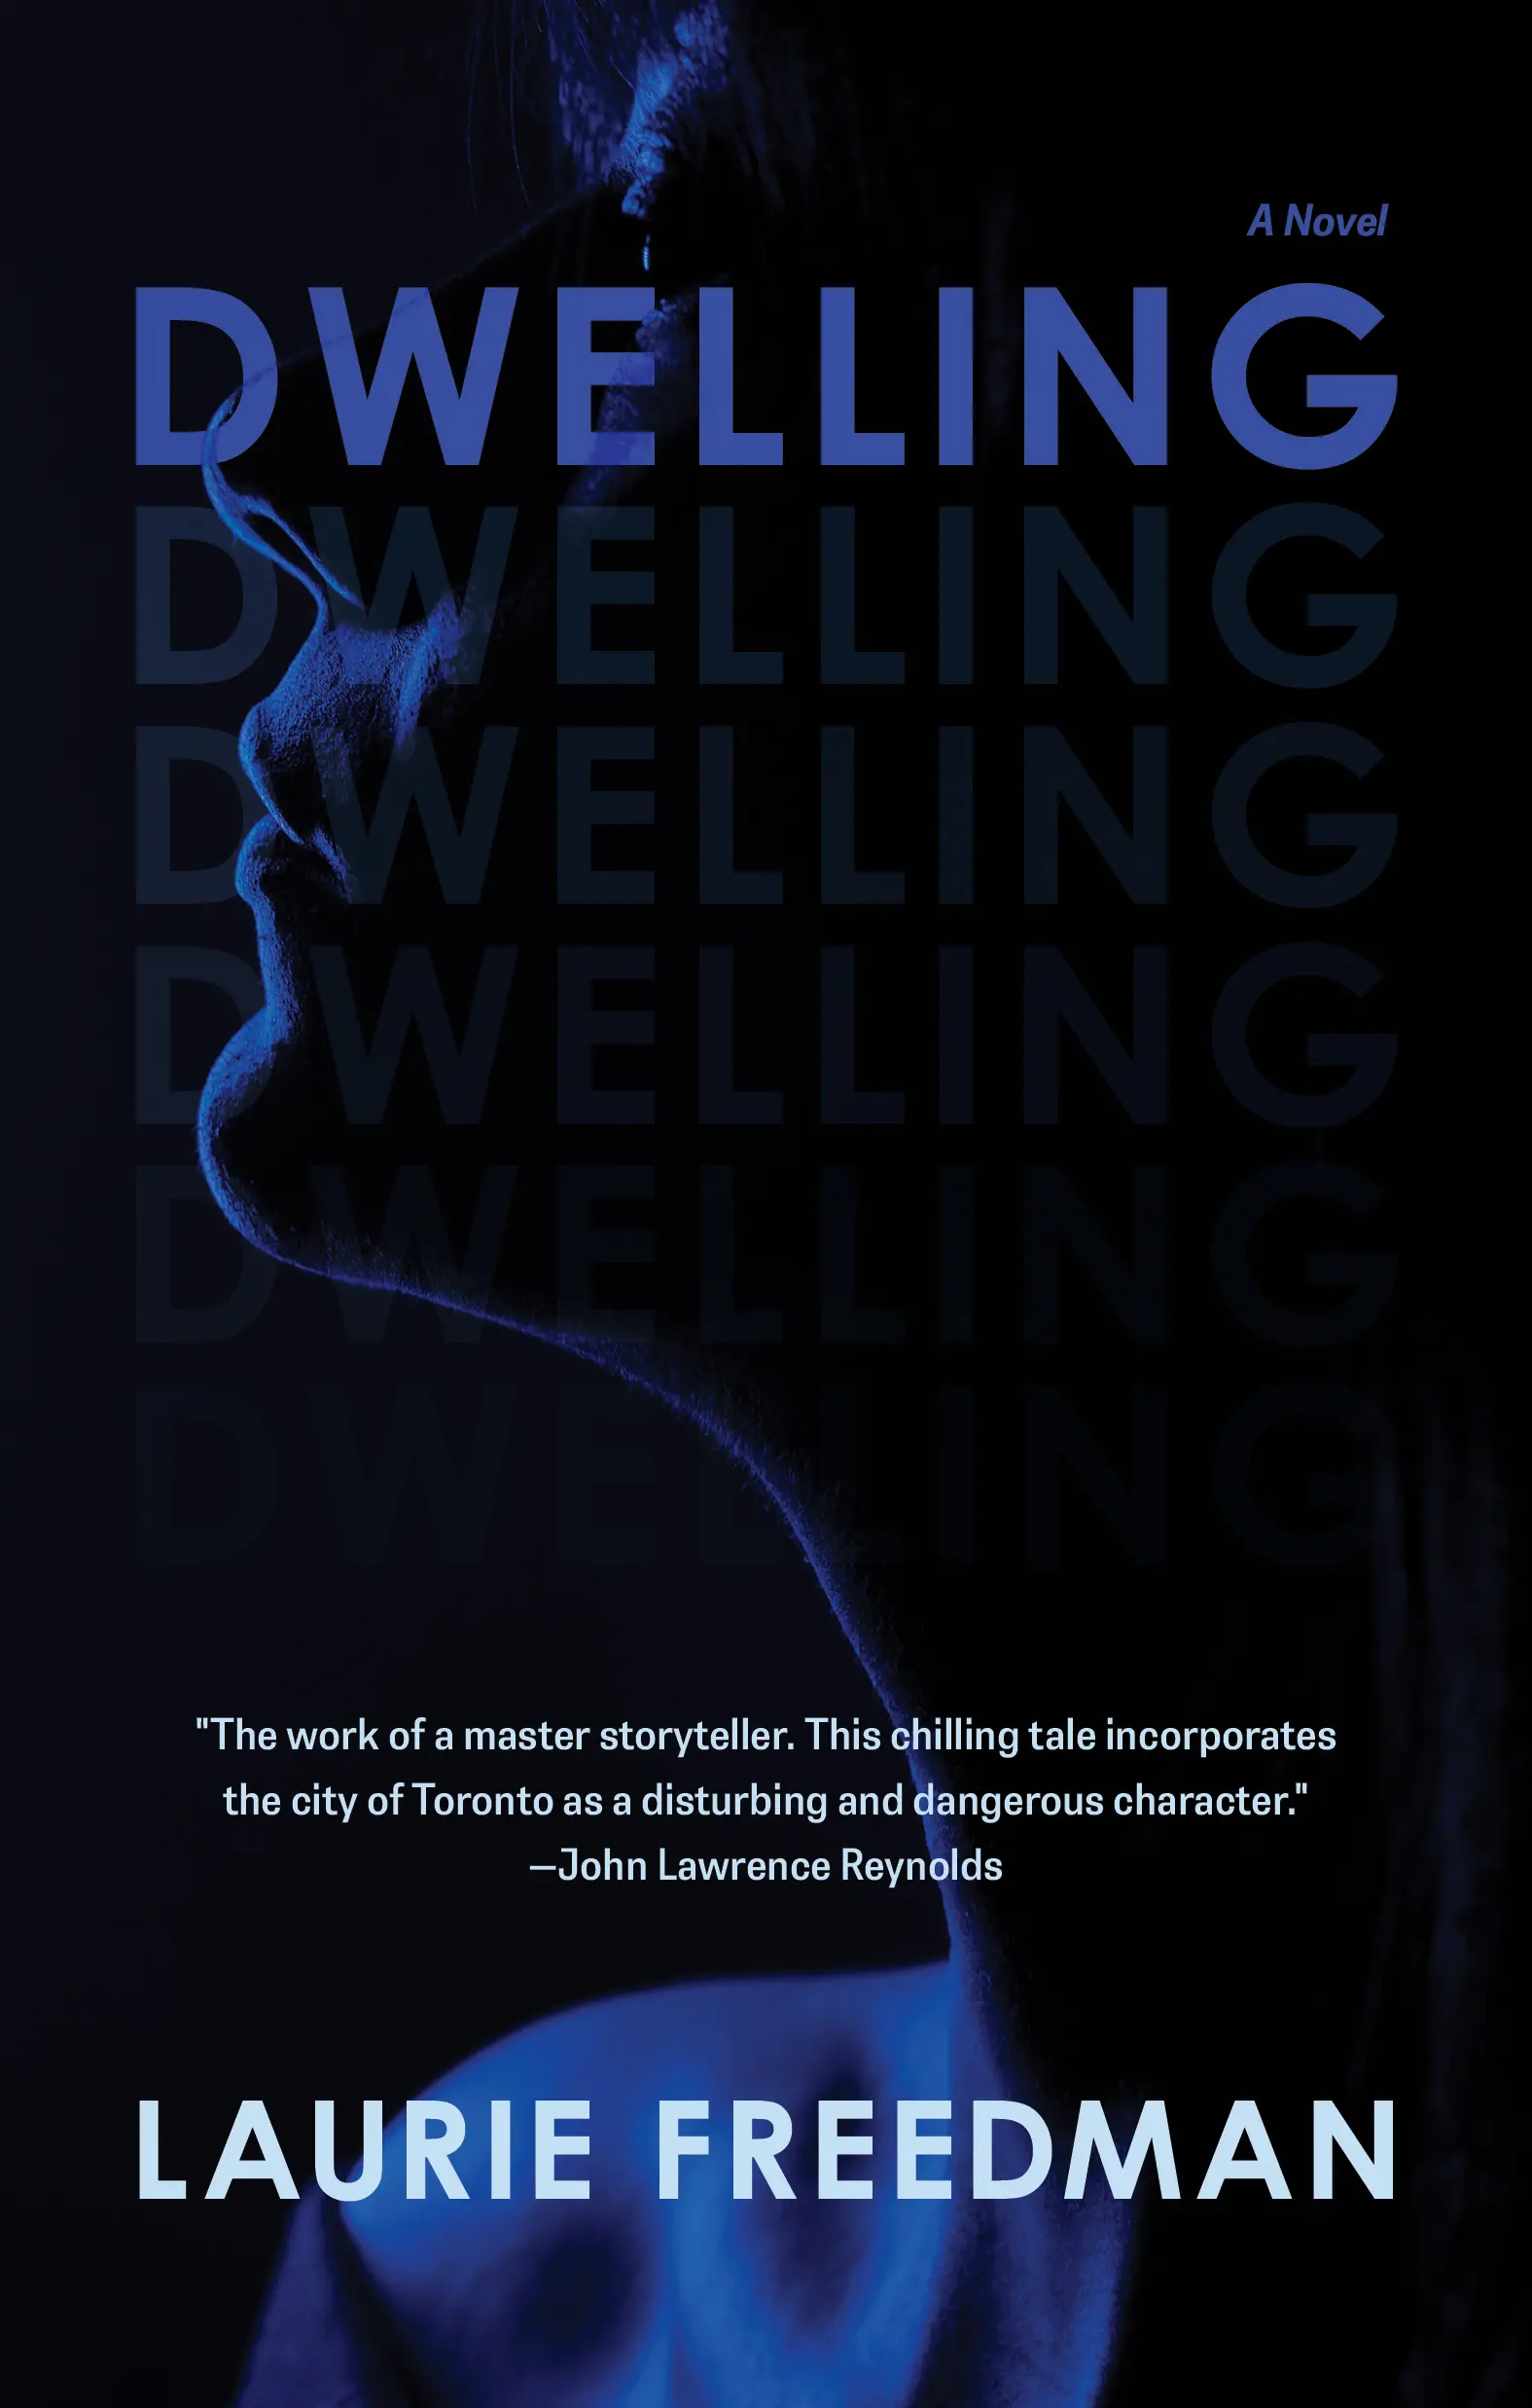 The cover of Dwelling by Laurie Freedman.